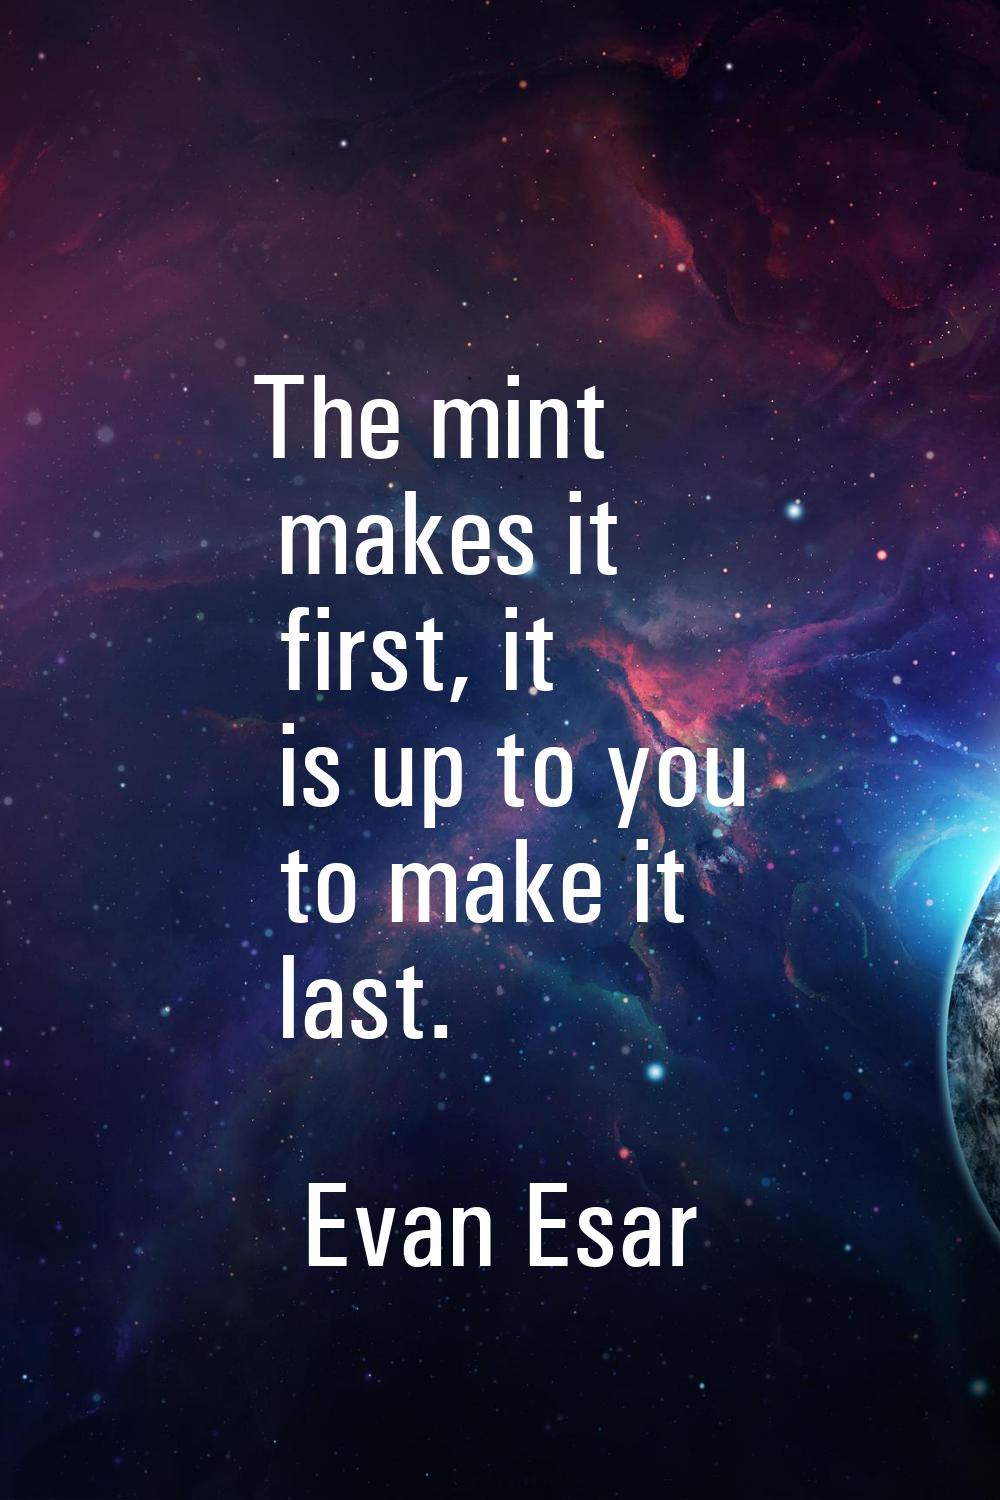 The mint makes it first, it is up to you to make it last.